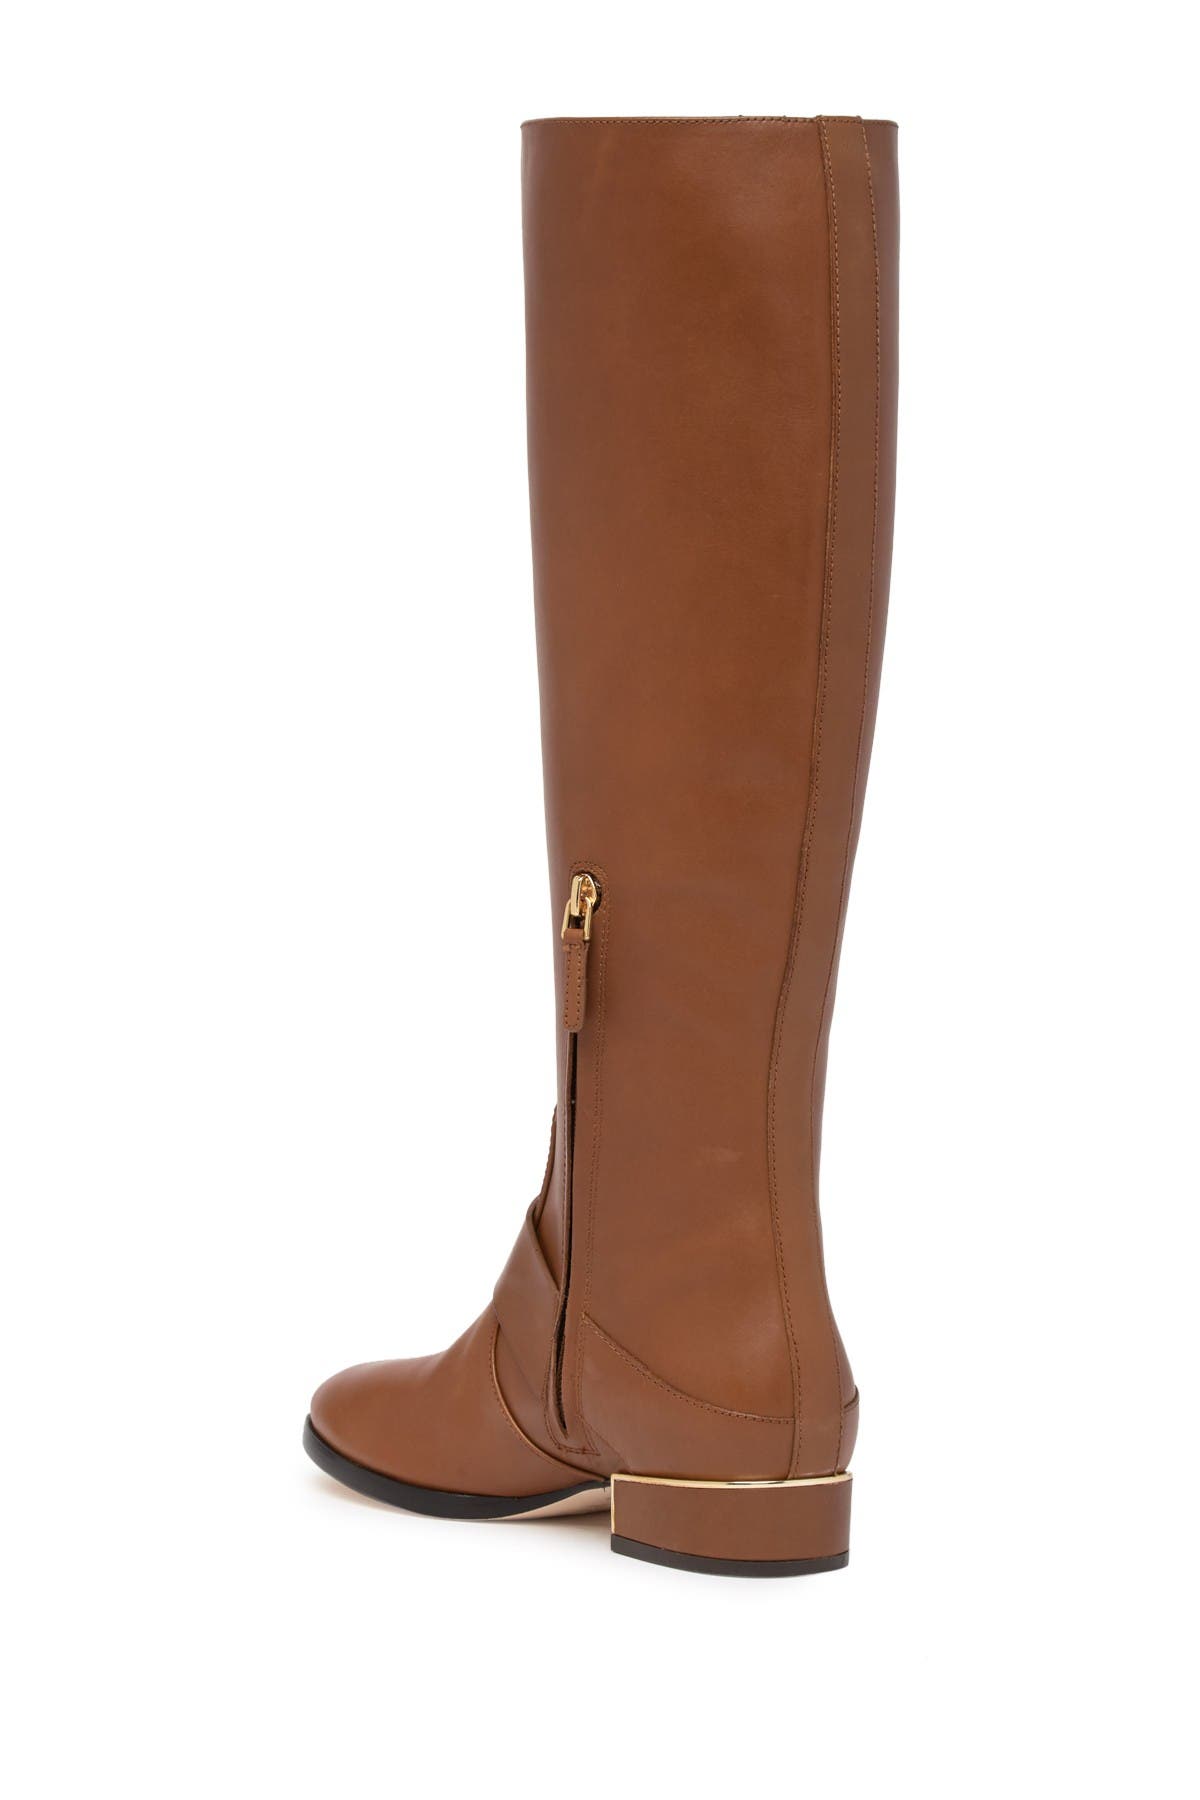 tory burch riding boots nordstrom rack